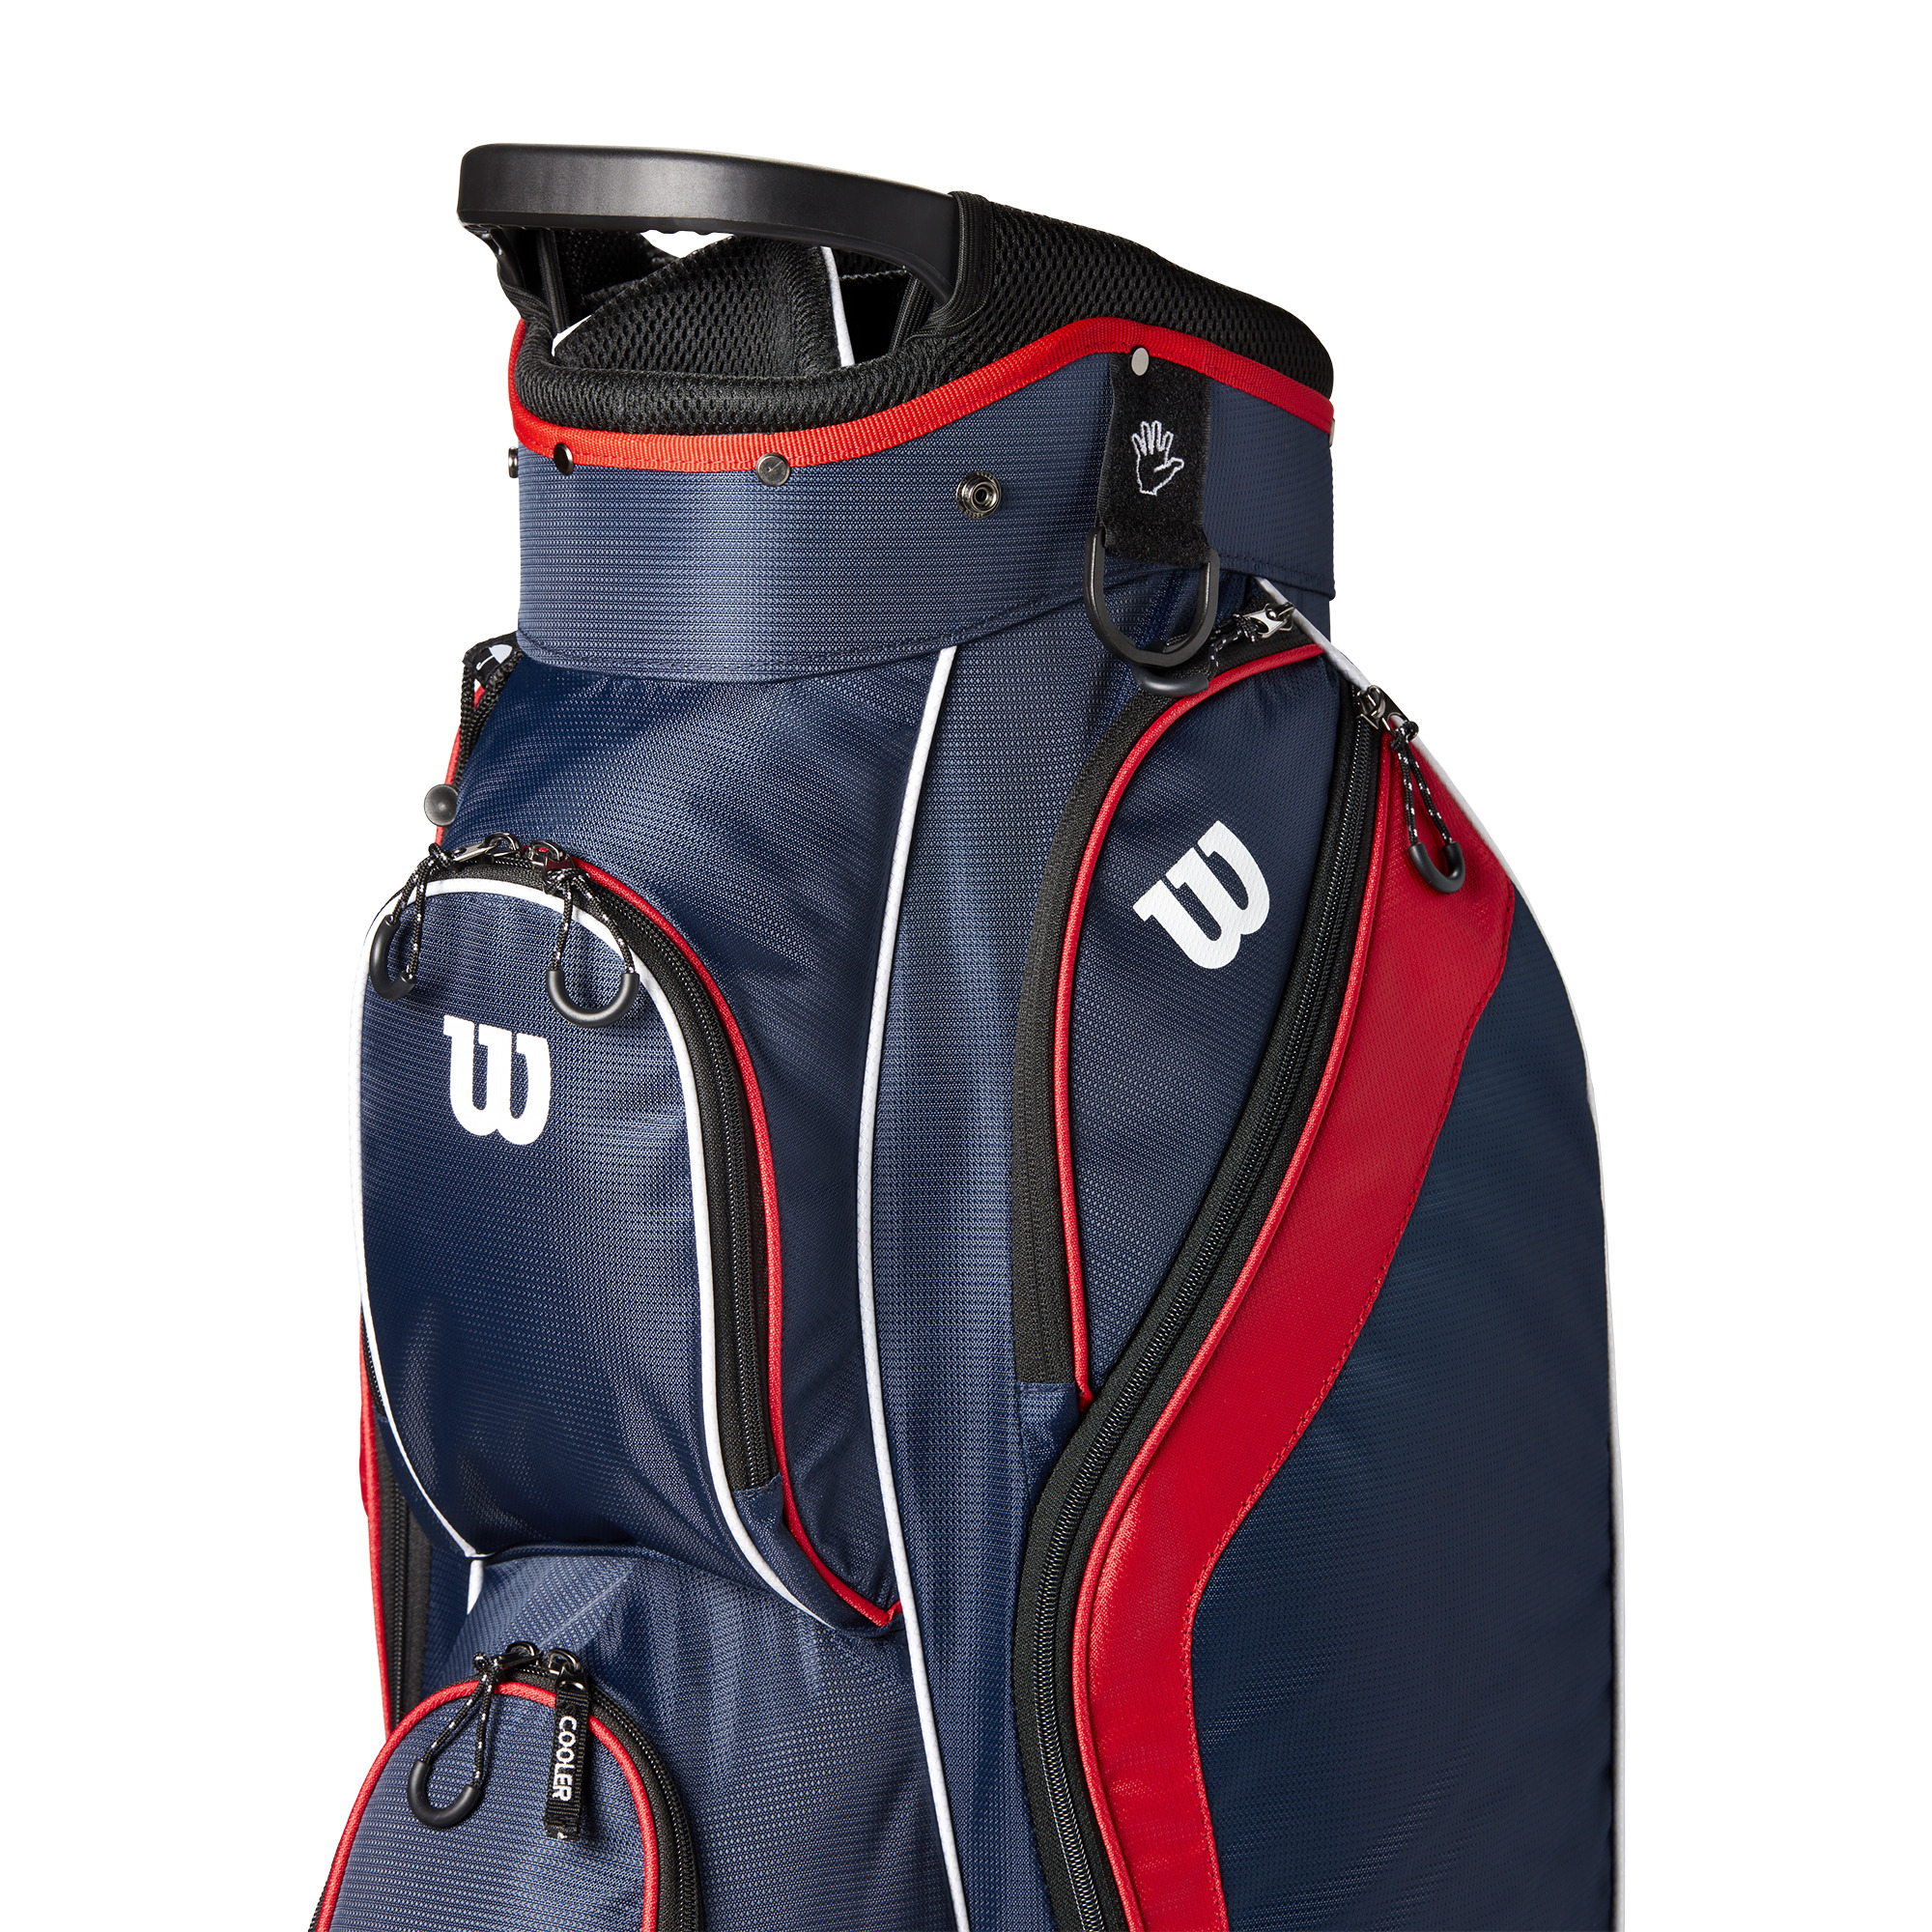 Wilson W Tour Cart Golf Bag, 14 Way Divider, Navy/Red/White - image 4 of 4